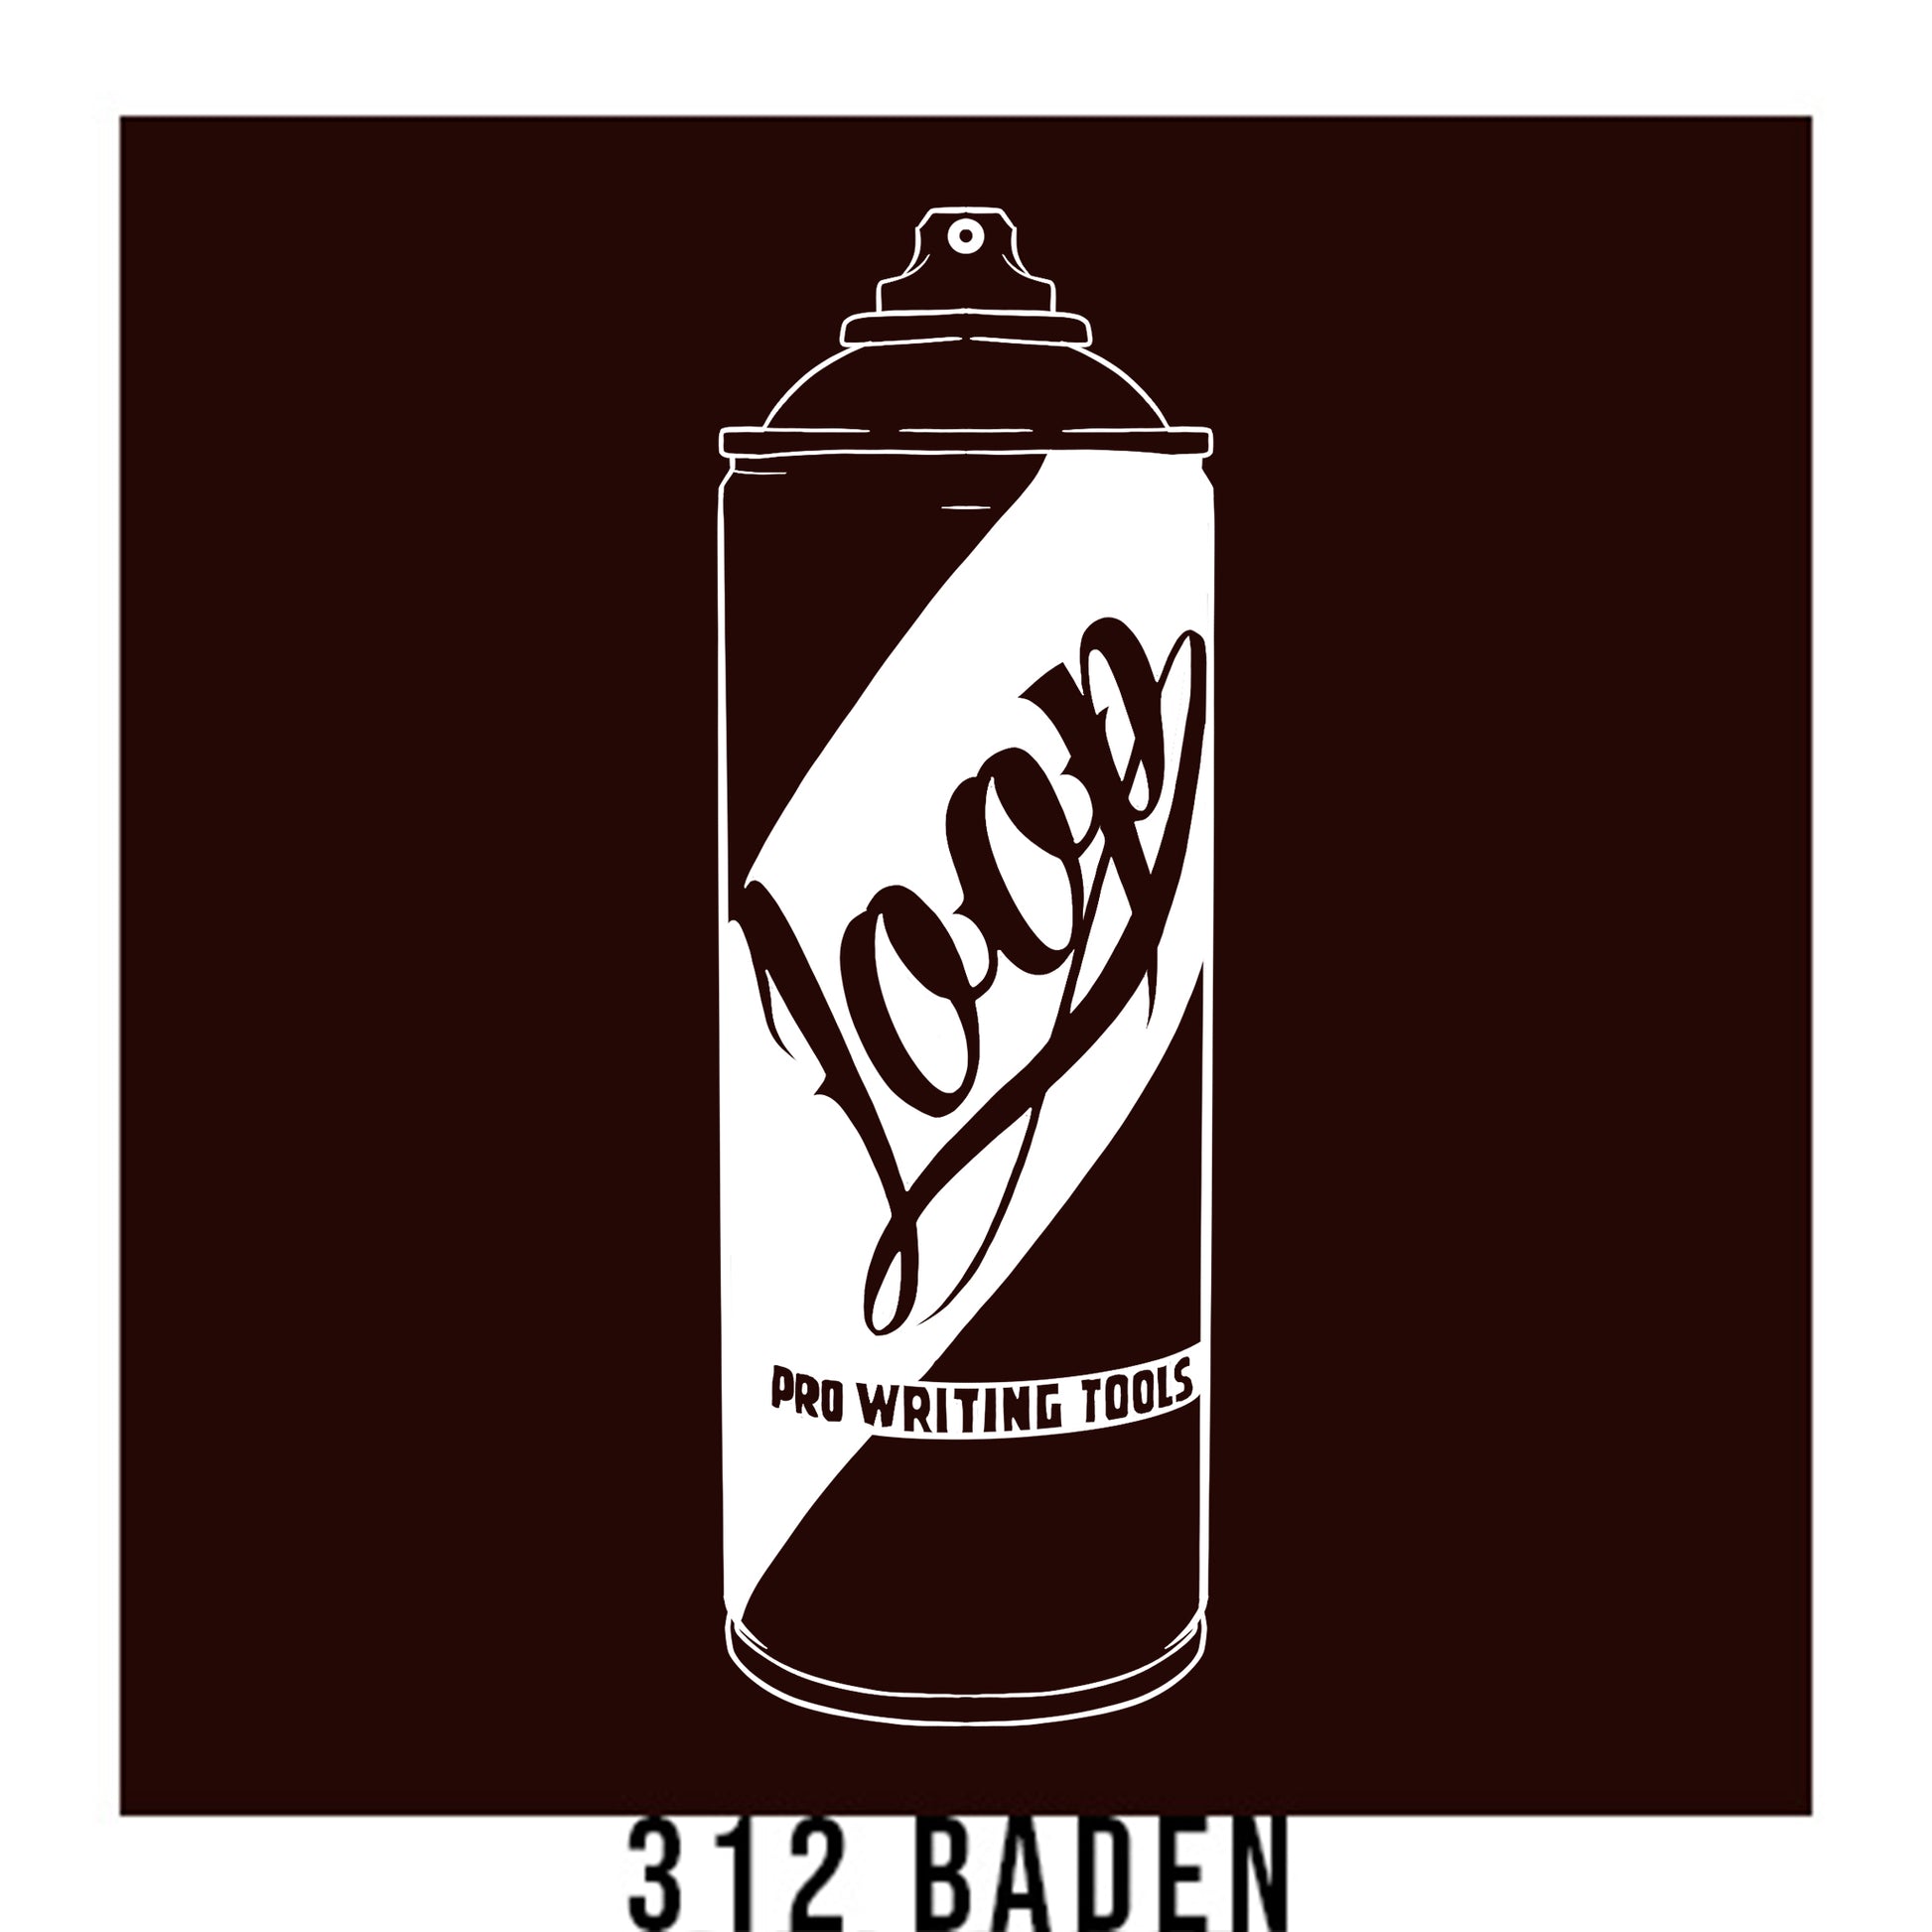 A black outline drawing of a dark plum spray paint can with the word "Loop" written on the face in script. The background is a color swatch of the same Dark Plum with a white border with the words "312 Baden" at the bottom.